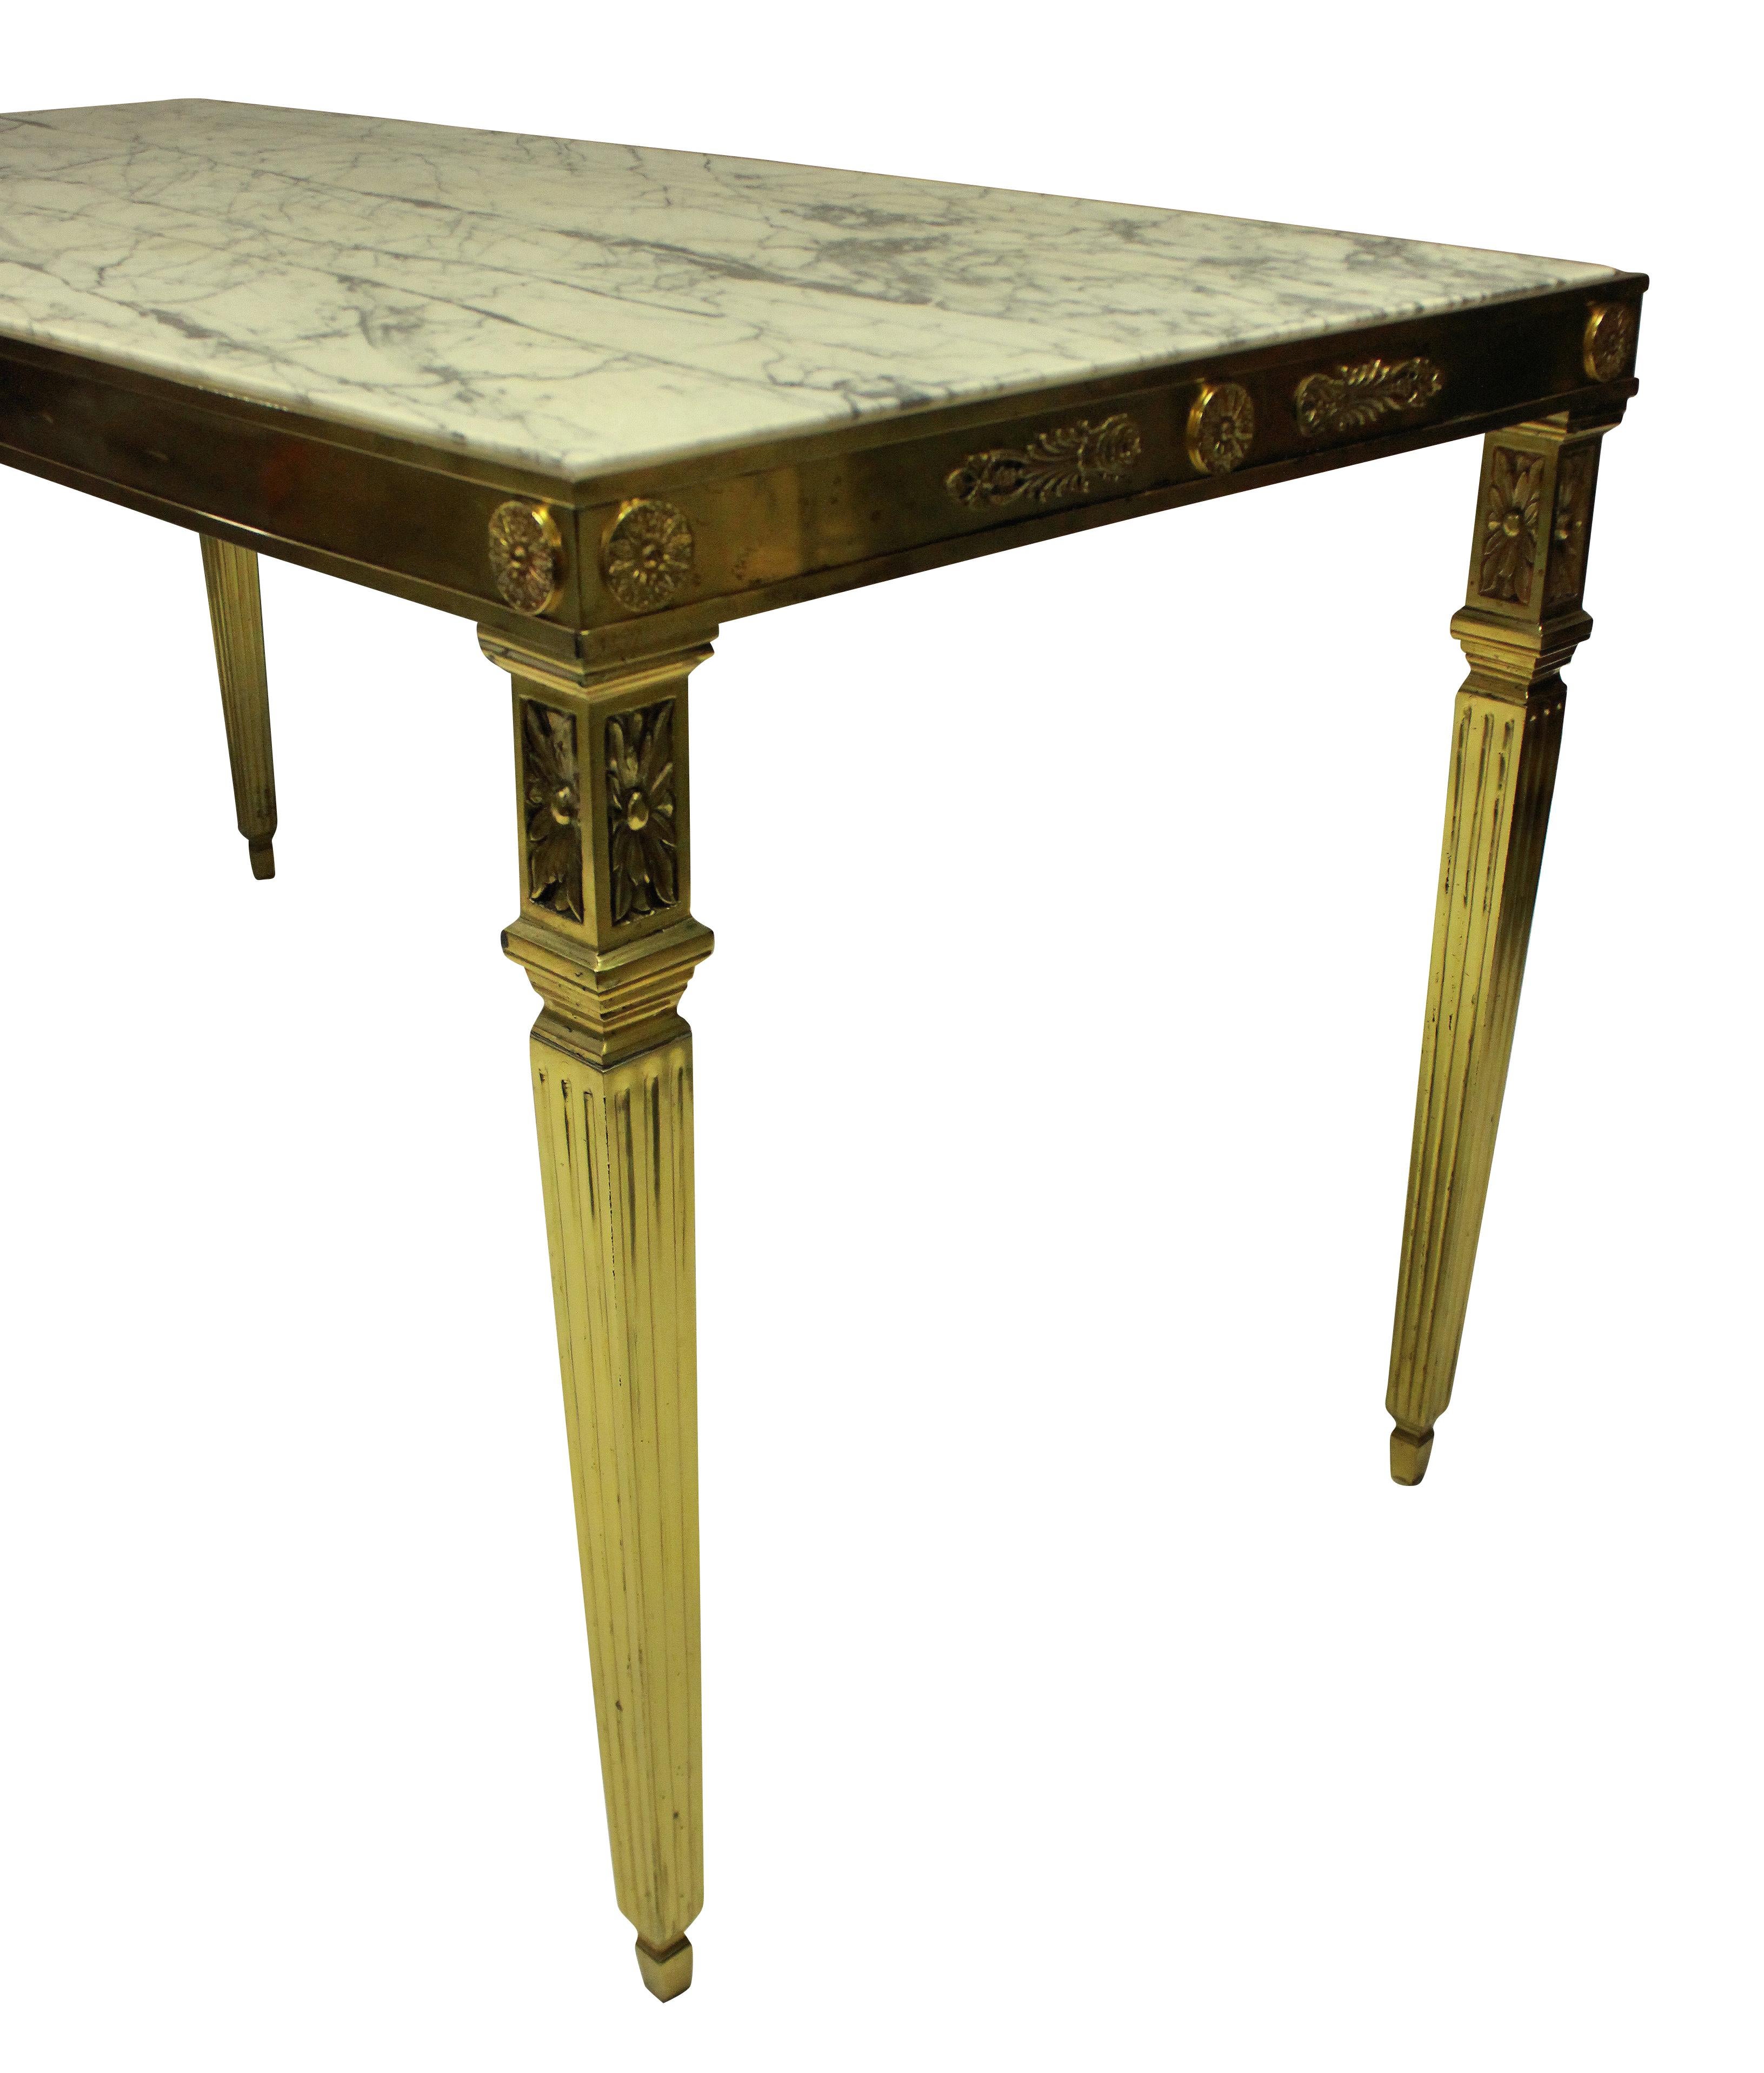 A fine Italian gilt bronze neoclassical center table, with acanthus decoration around each frieze and on square tapering fluted legs. With an inset grey and off white marble top.